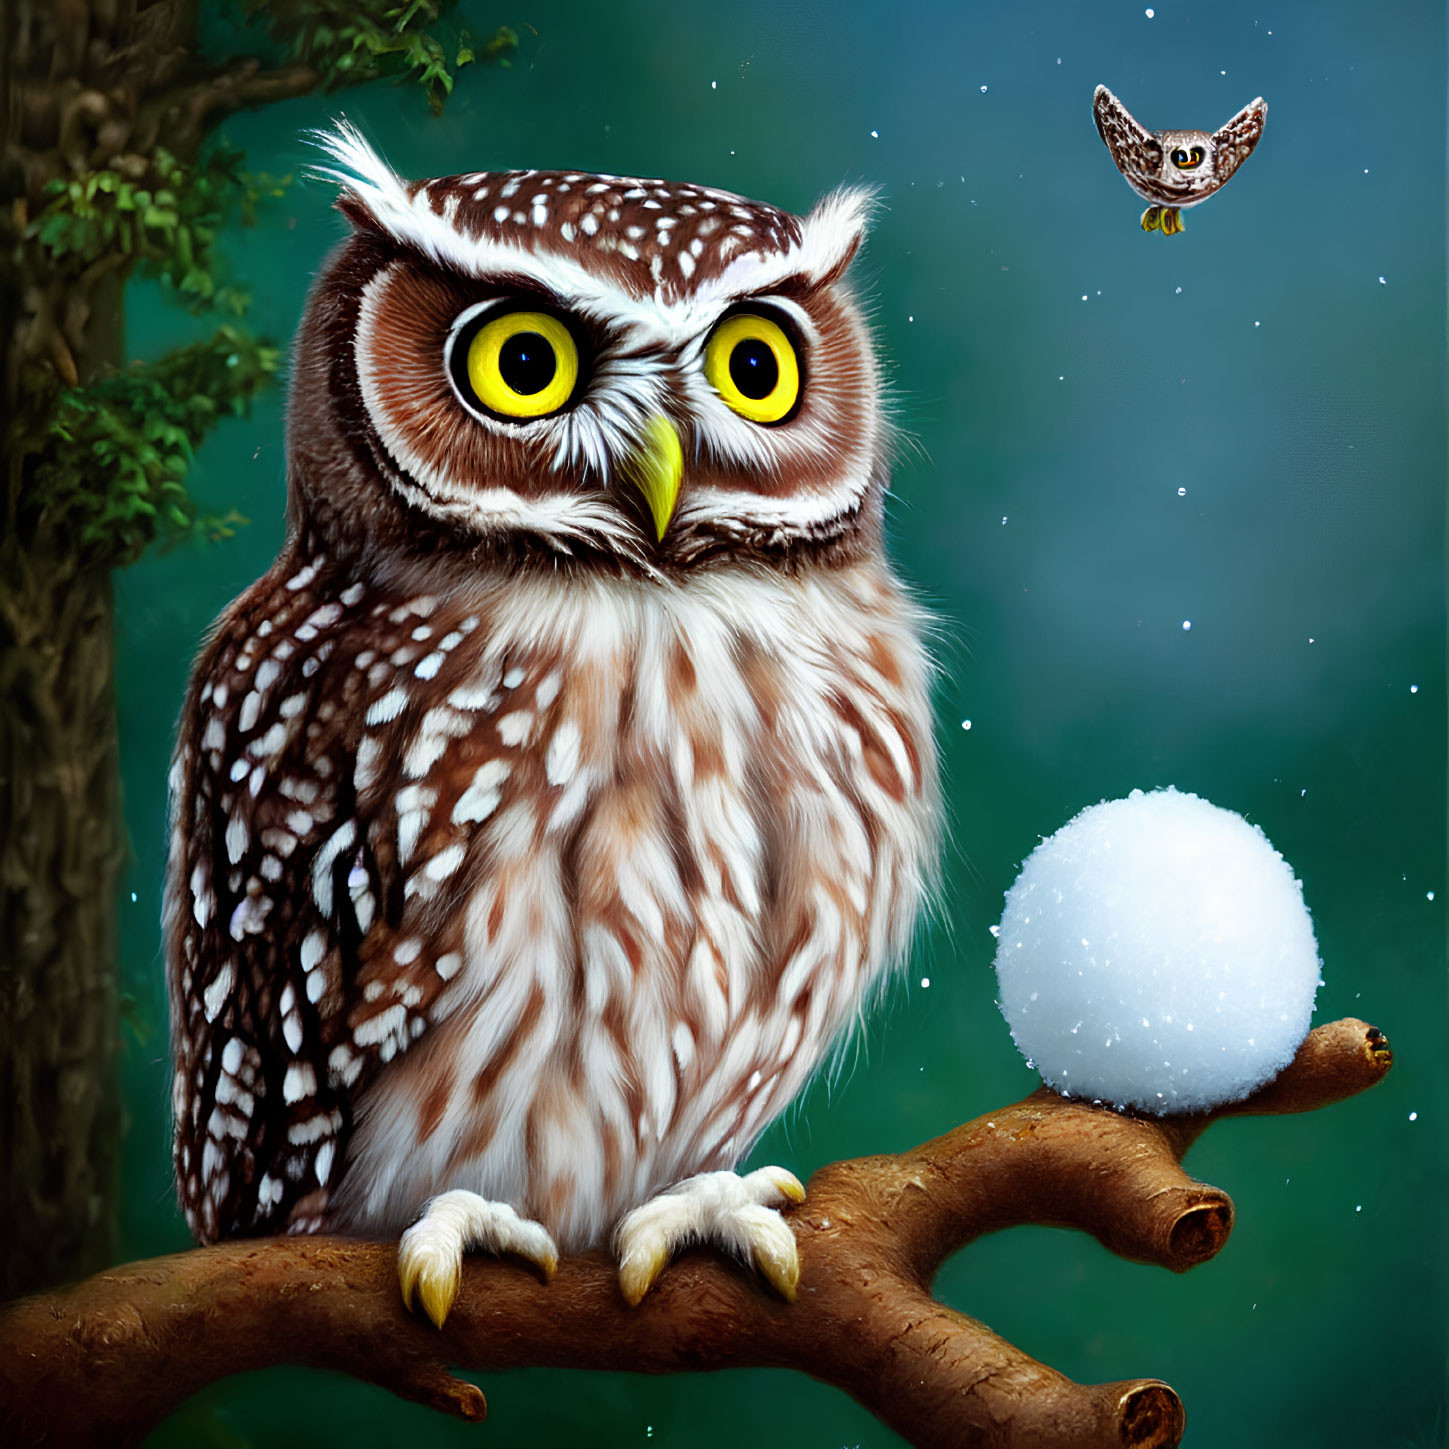 Detailed Illustration of Brown and White Owl on Branch with Small White Sphere